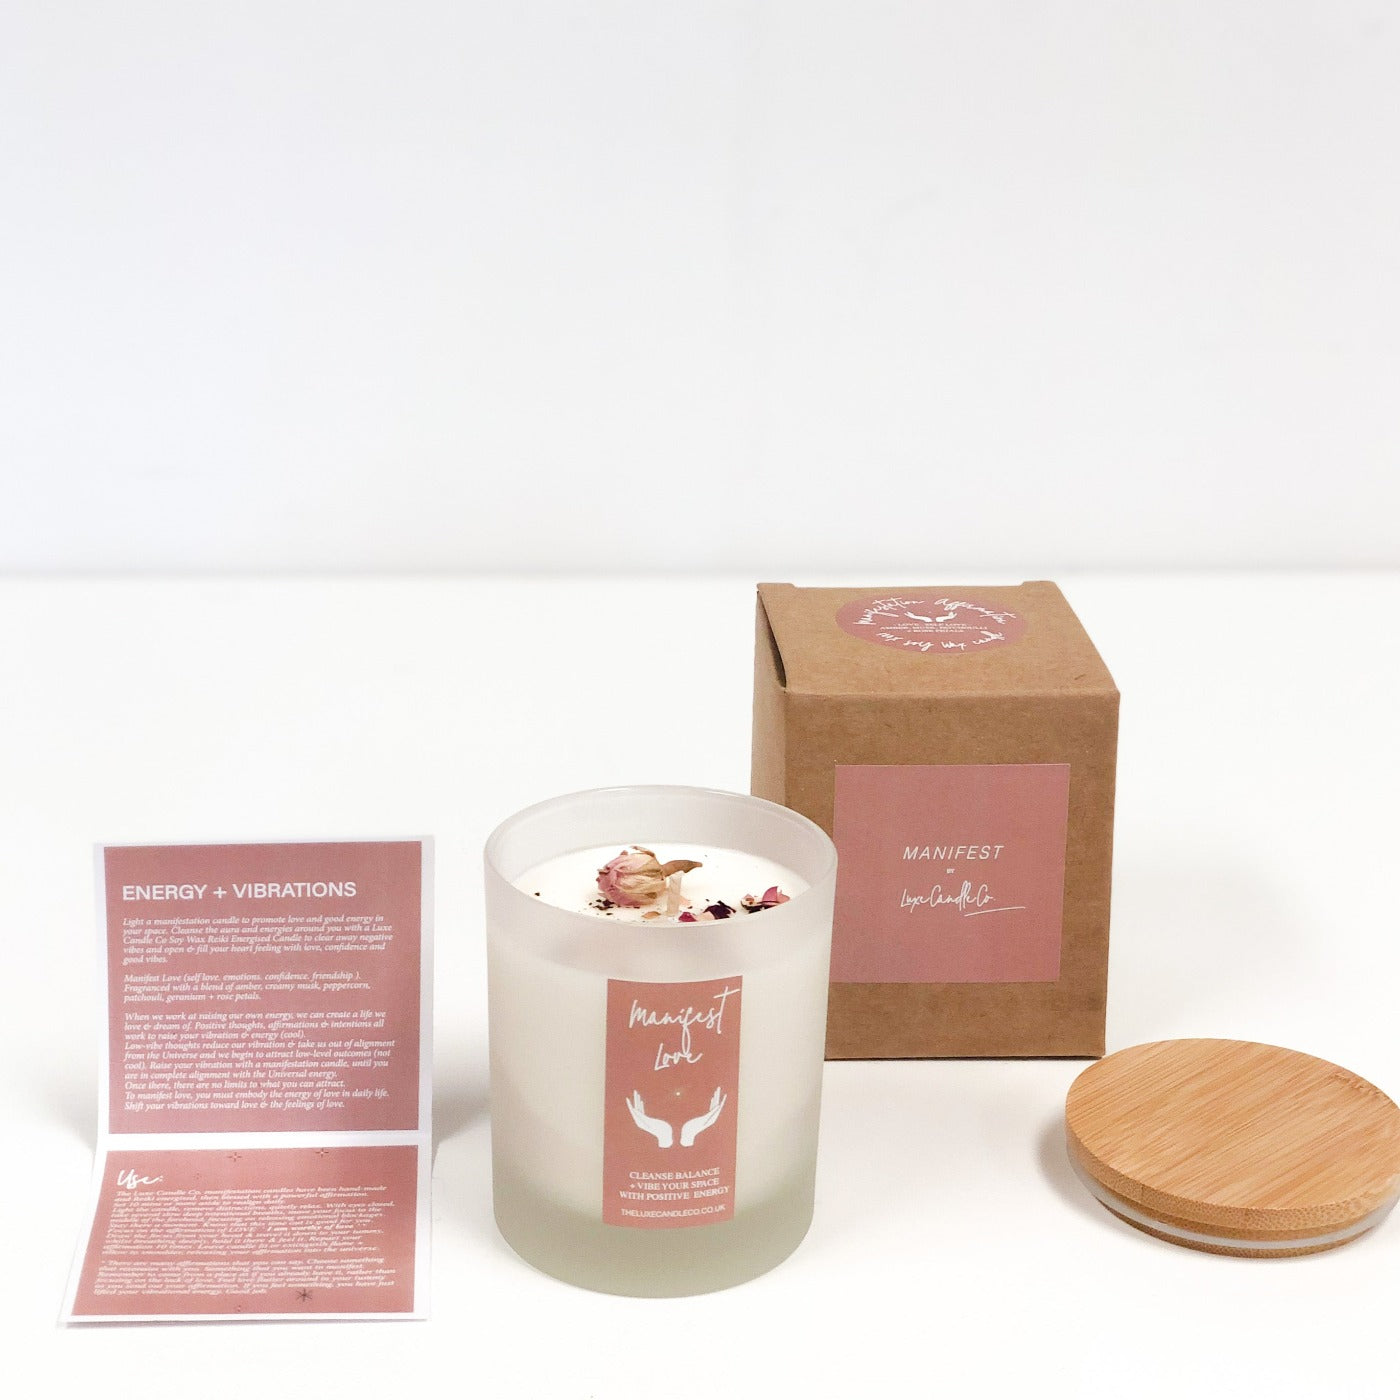 Manifest Love Candle | Cleanse balance + vibe your space with positive energy to attract love | The Luxe Candle Co.